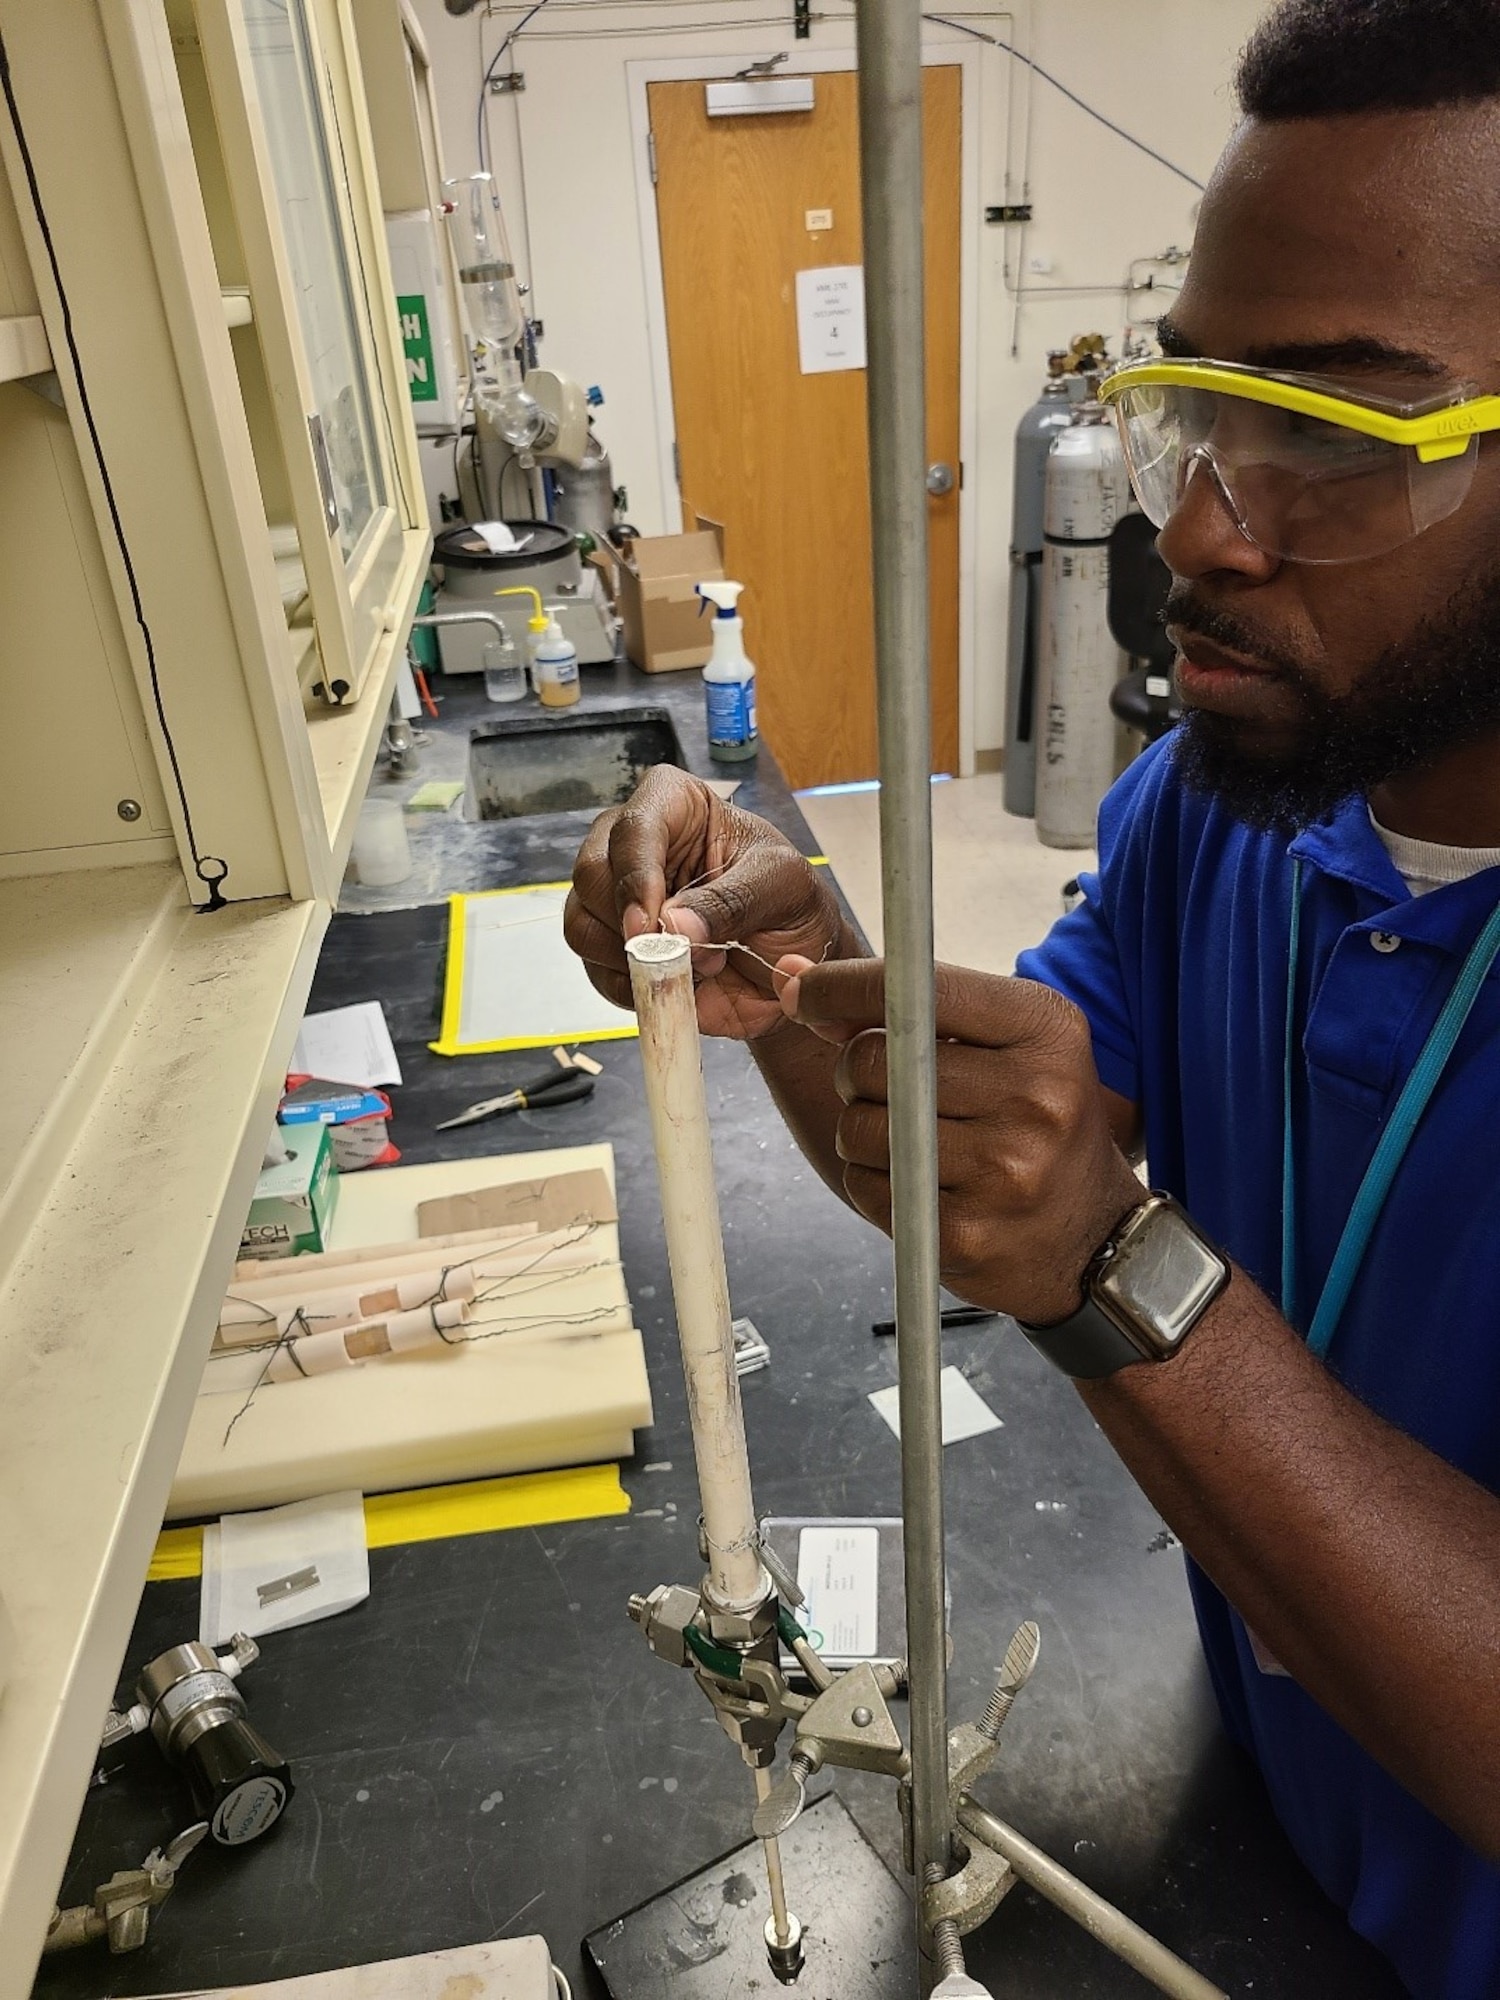 Dr. Andre Spears, an Air Force Research Laboratory Space Vehicles Directorate postdoctoral research fellow from the University of New Mexico, assembles a solid oxide fuel cell for testing, as part of the Bipropellant Enabled Electrical Power Supply, or BEEPS, effort.